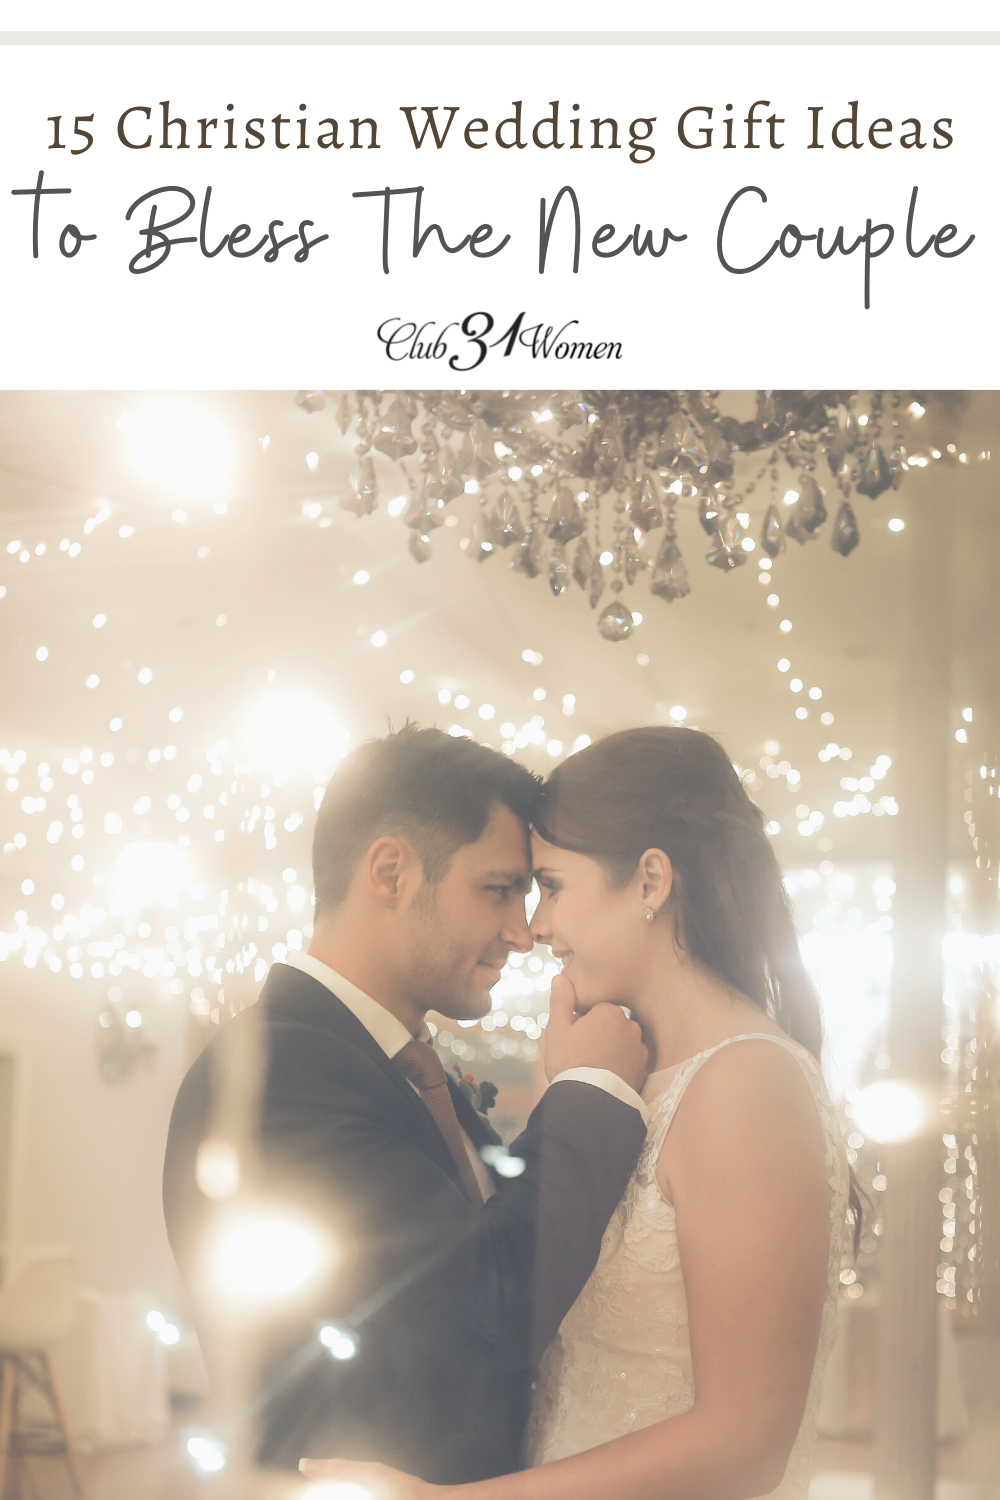 If you know someone getting married and are looking for some really meaningful gift ideas, here is a list of some personal and special gifts that will delight the bride and groom. via @Club31Women